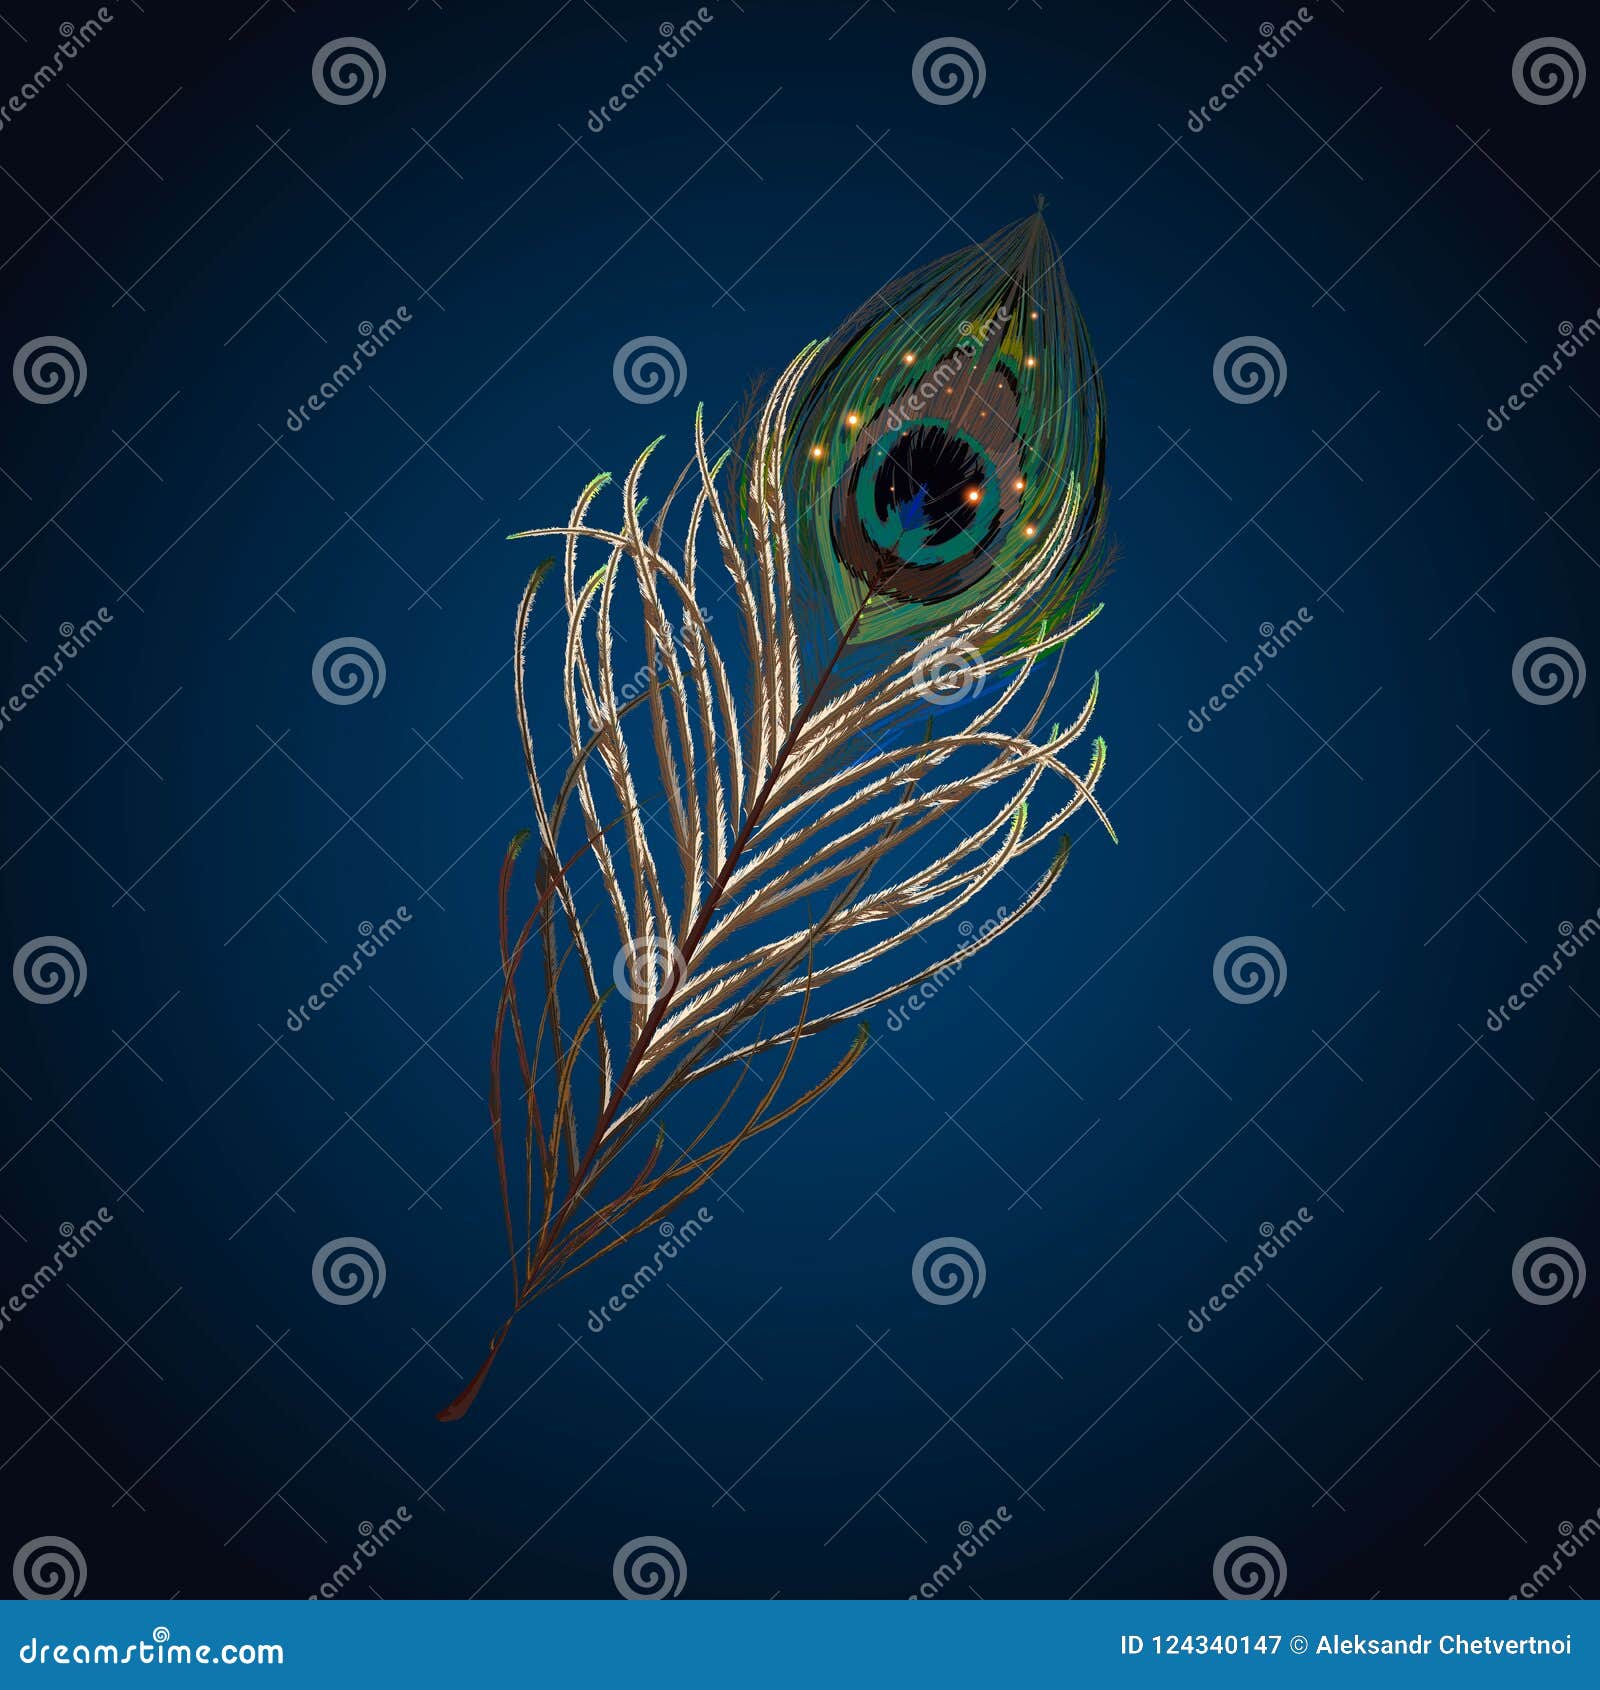 1,940 Peacock Feather Realistic Images, Stock Photos, 3D objects, & Vectors